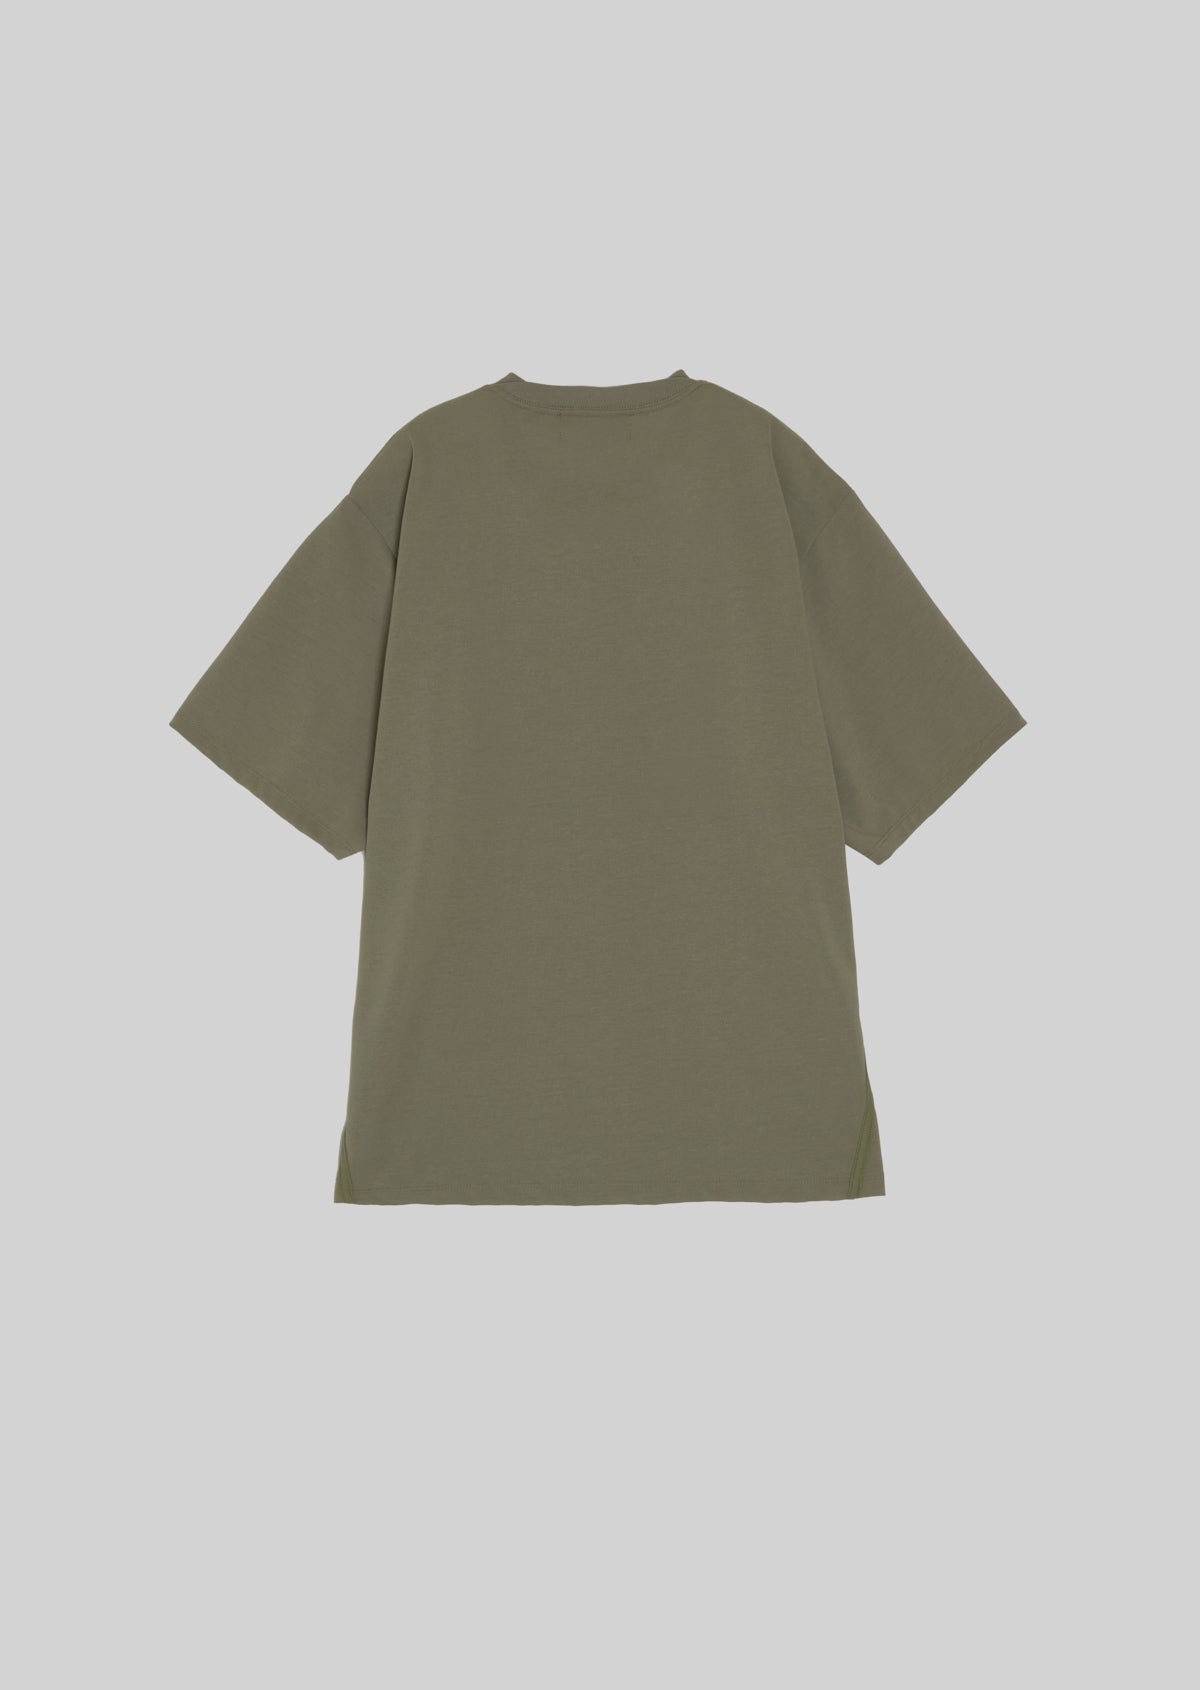 POLYESTER COTTON FEEL T-SHIRT OLIVE　8001-1702